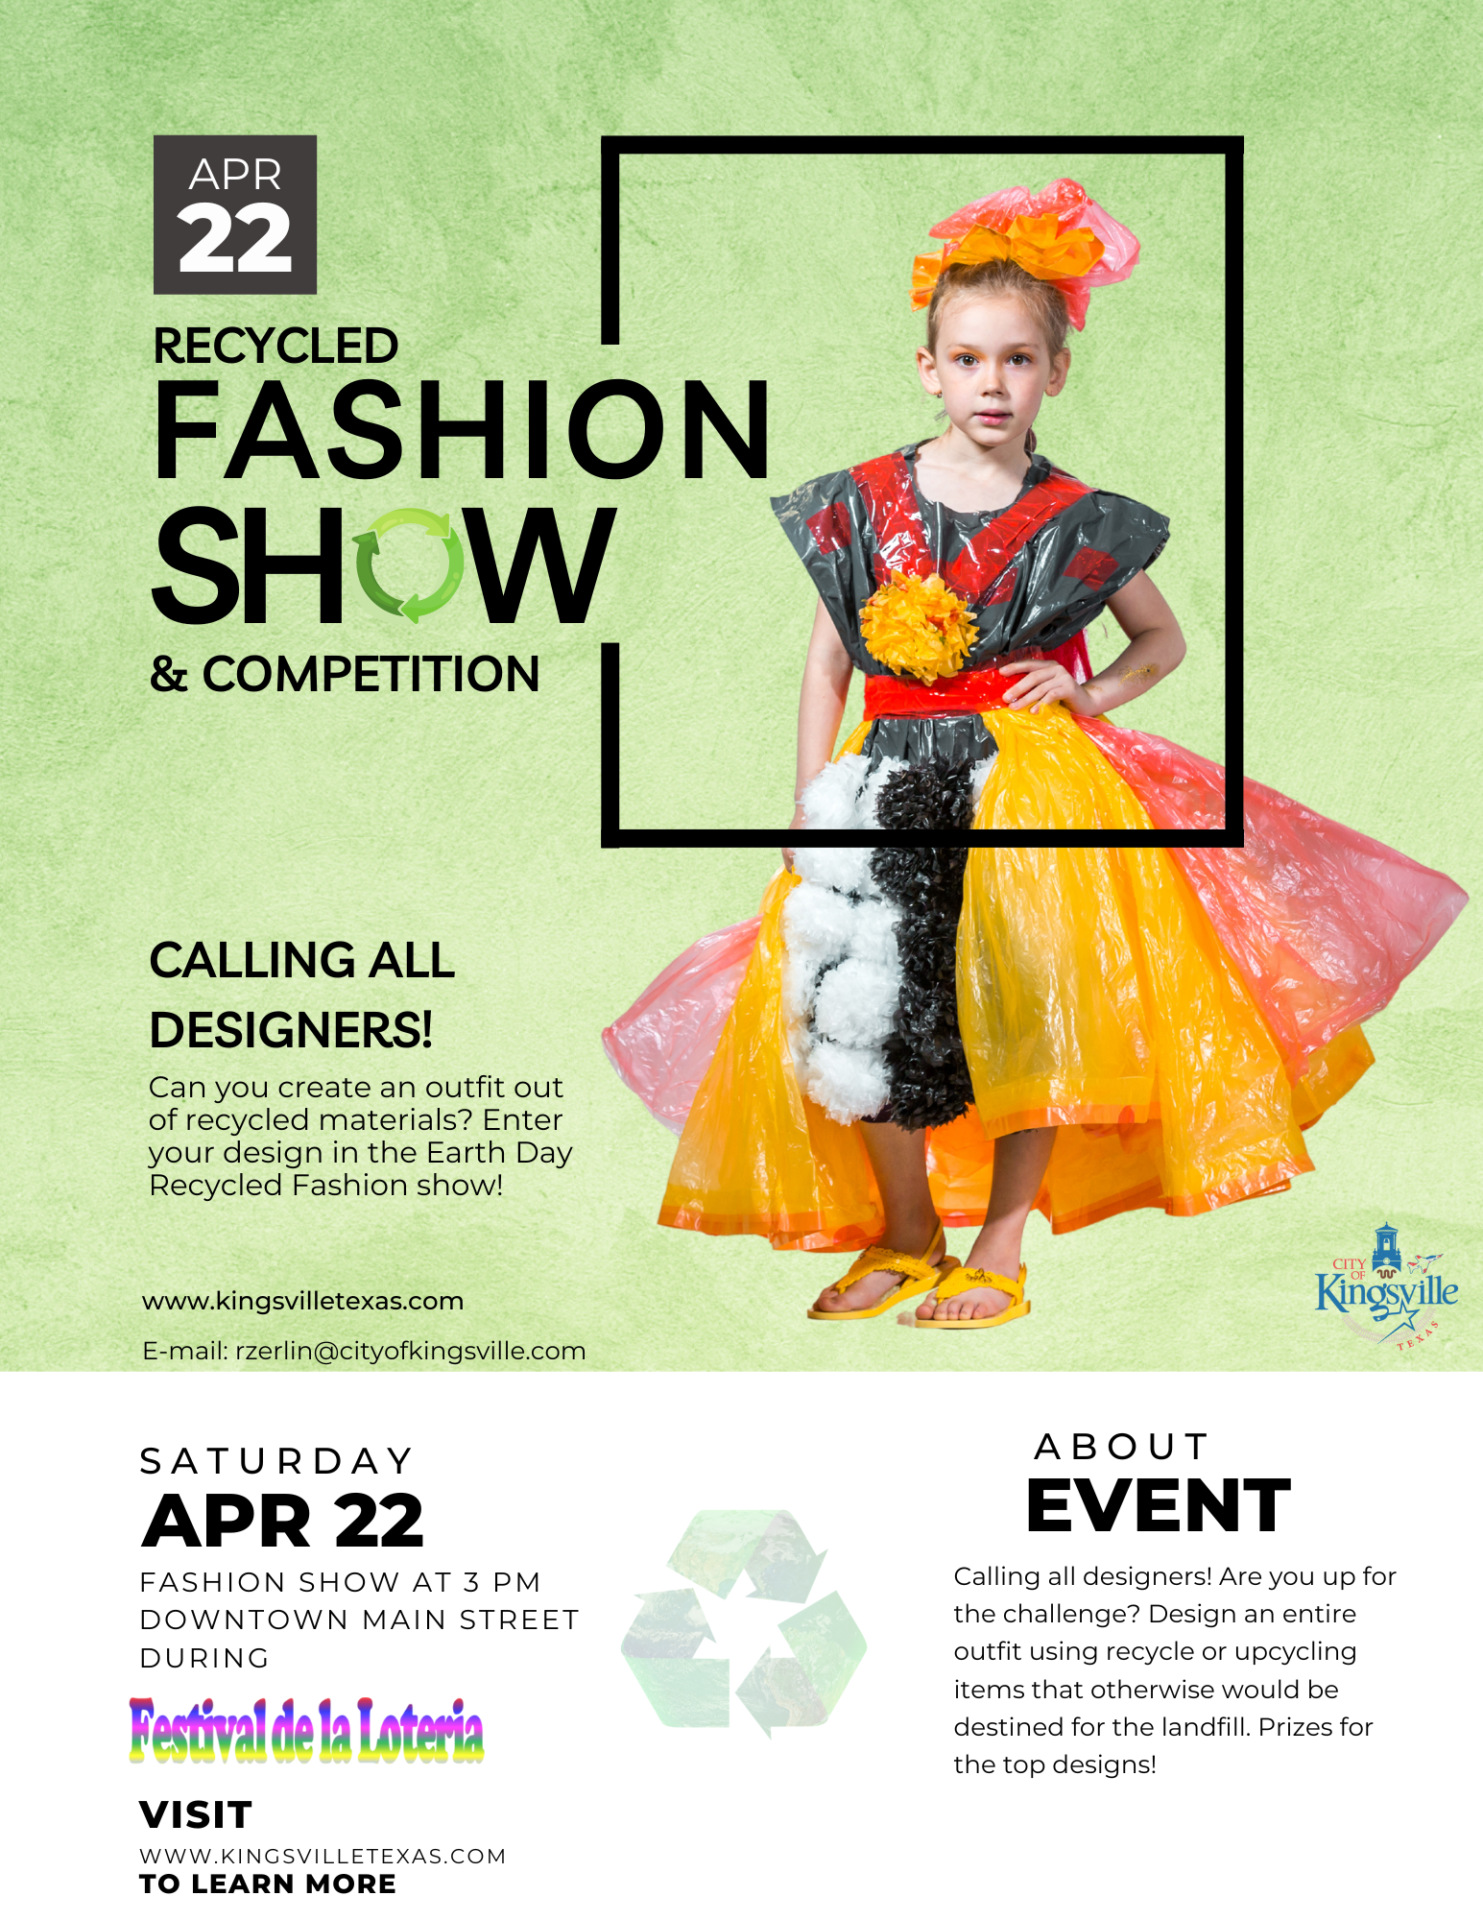 Recycled Fashion Show - Kingsville Visitors Center